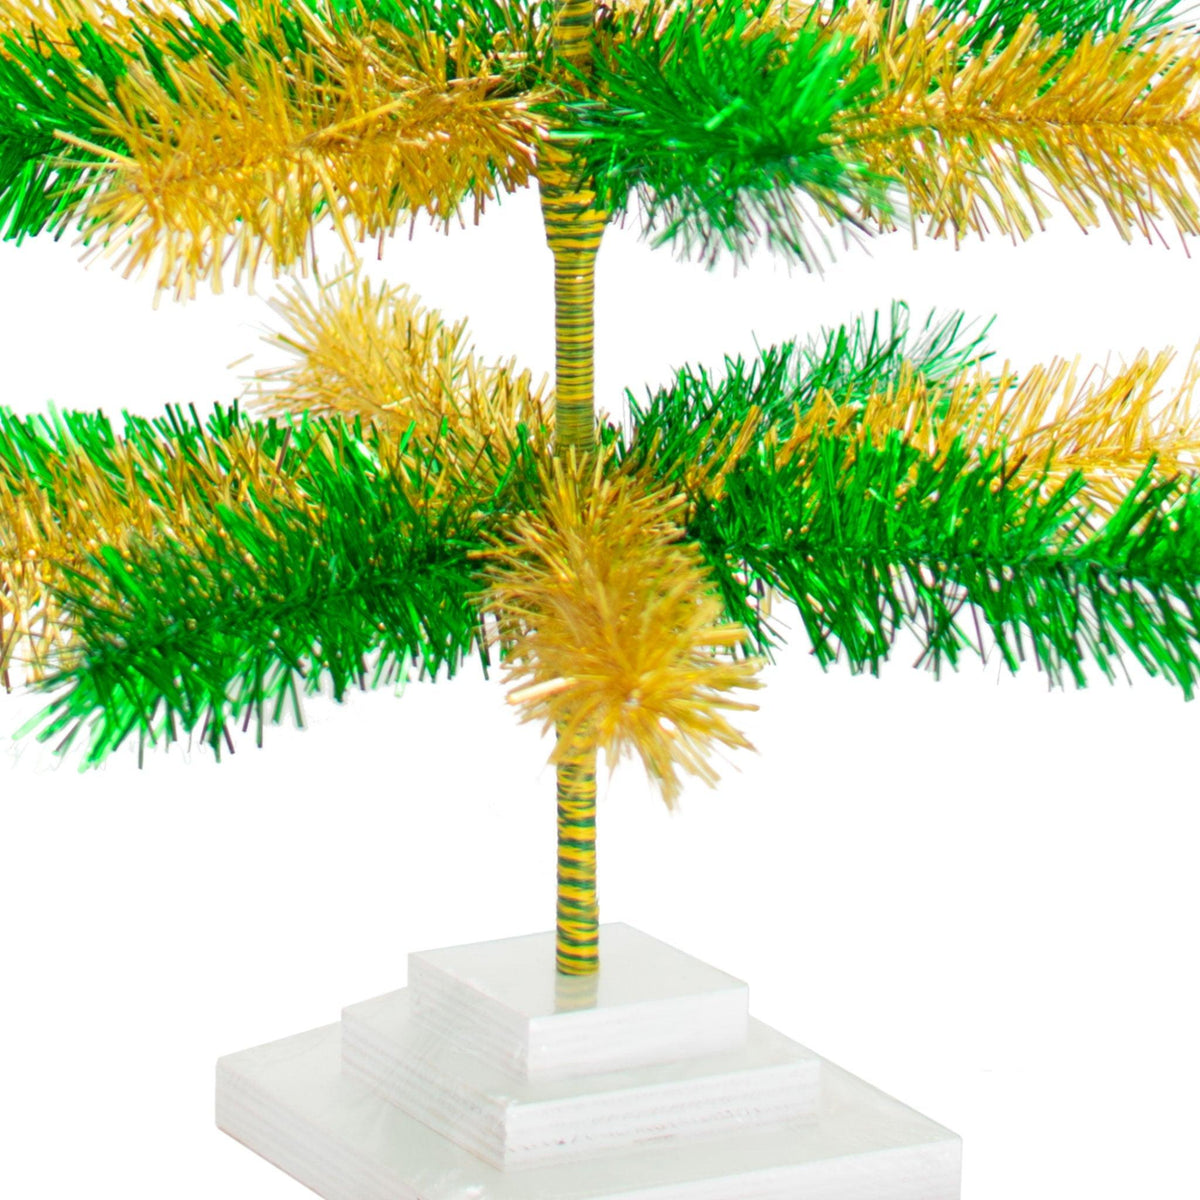 Introducing Lee Display's brand new St. Patrick's Day Themed Mixed Tinsel Christmas Trees made by hand in the USA!    Celebrate the luck of the Irish spirit with a Shamrock-Green and Gold-colored Tinsel Christmas Tree.  Shop now at leedisplay.com